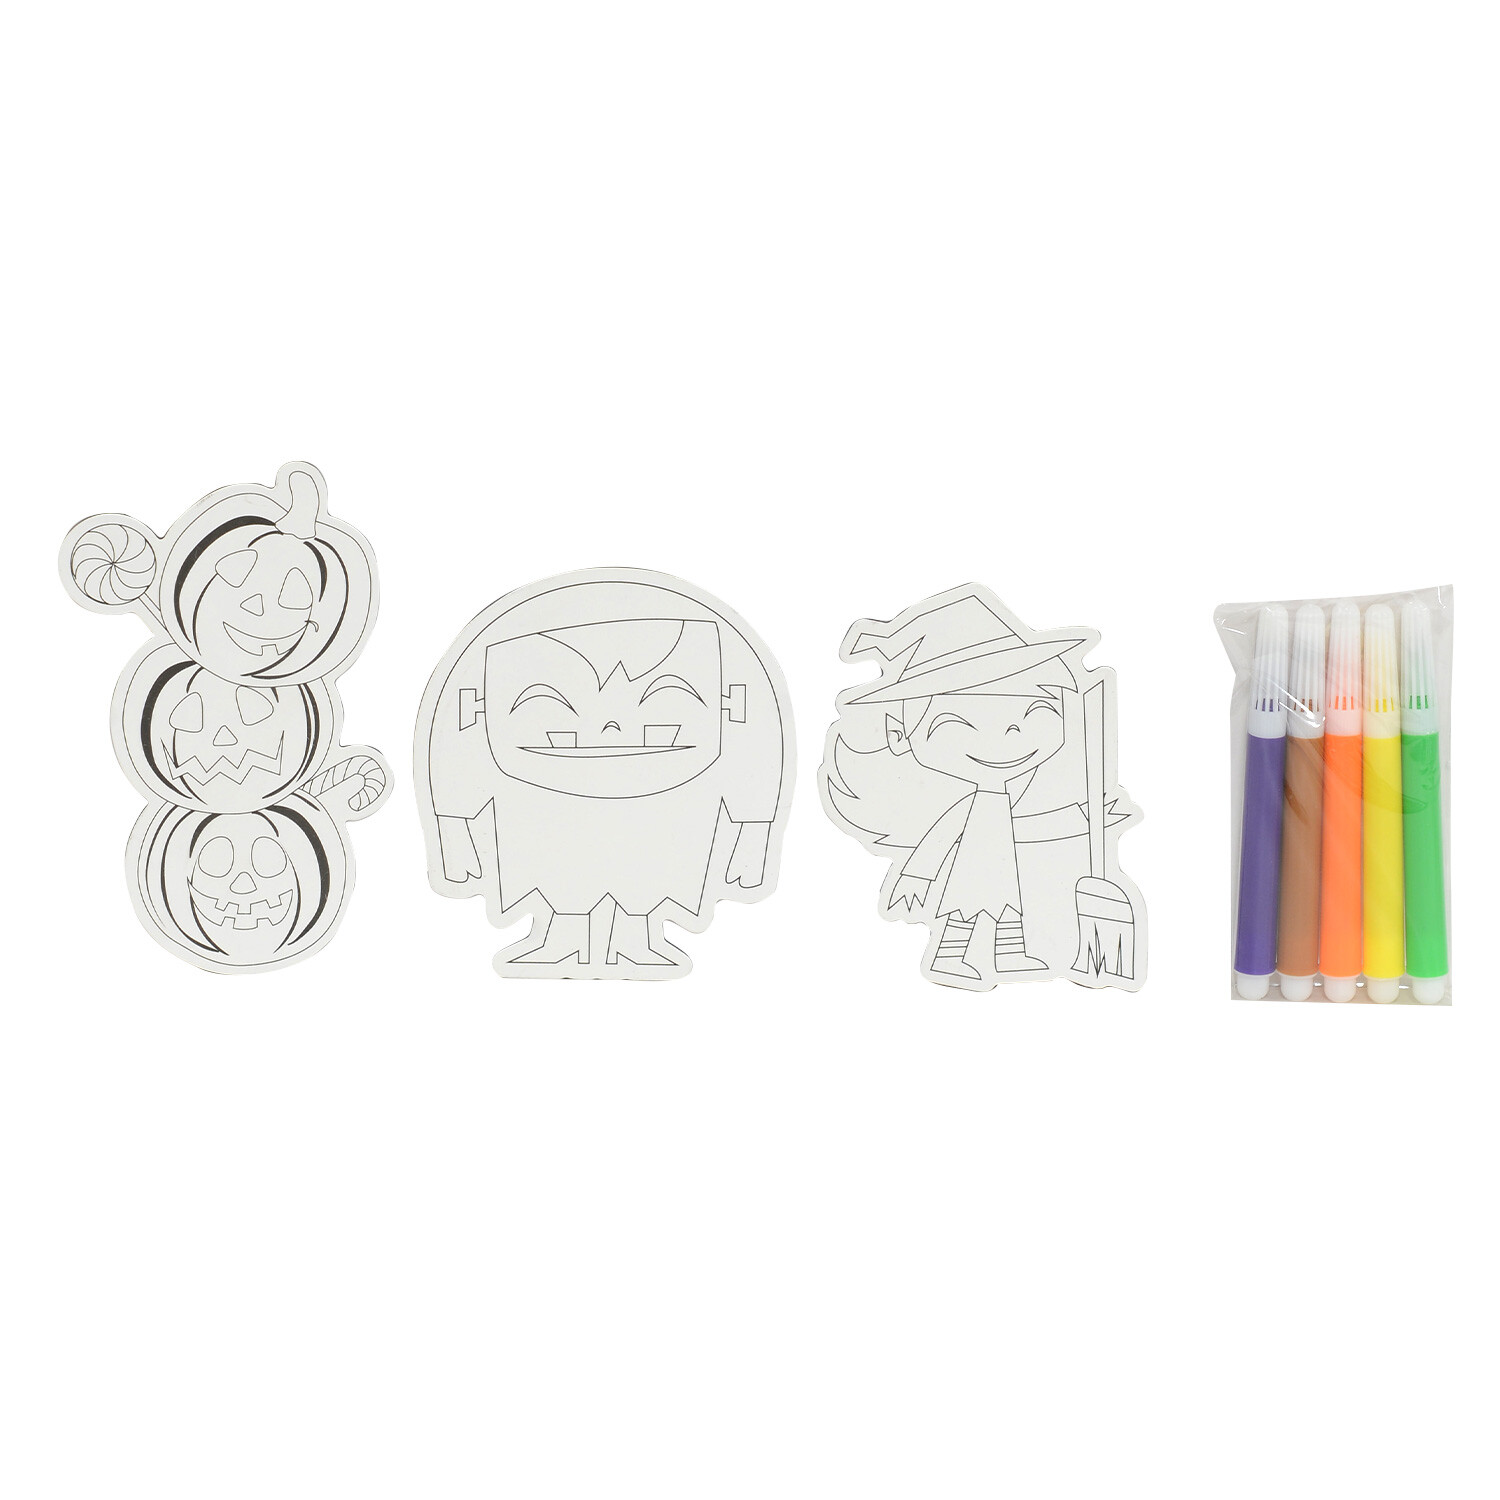 Colour Your Own Halloween Magnets Image 2